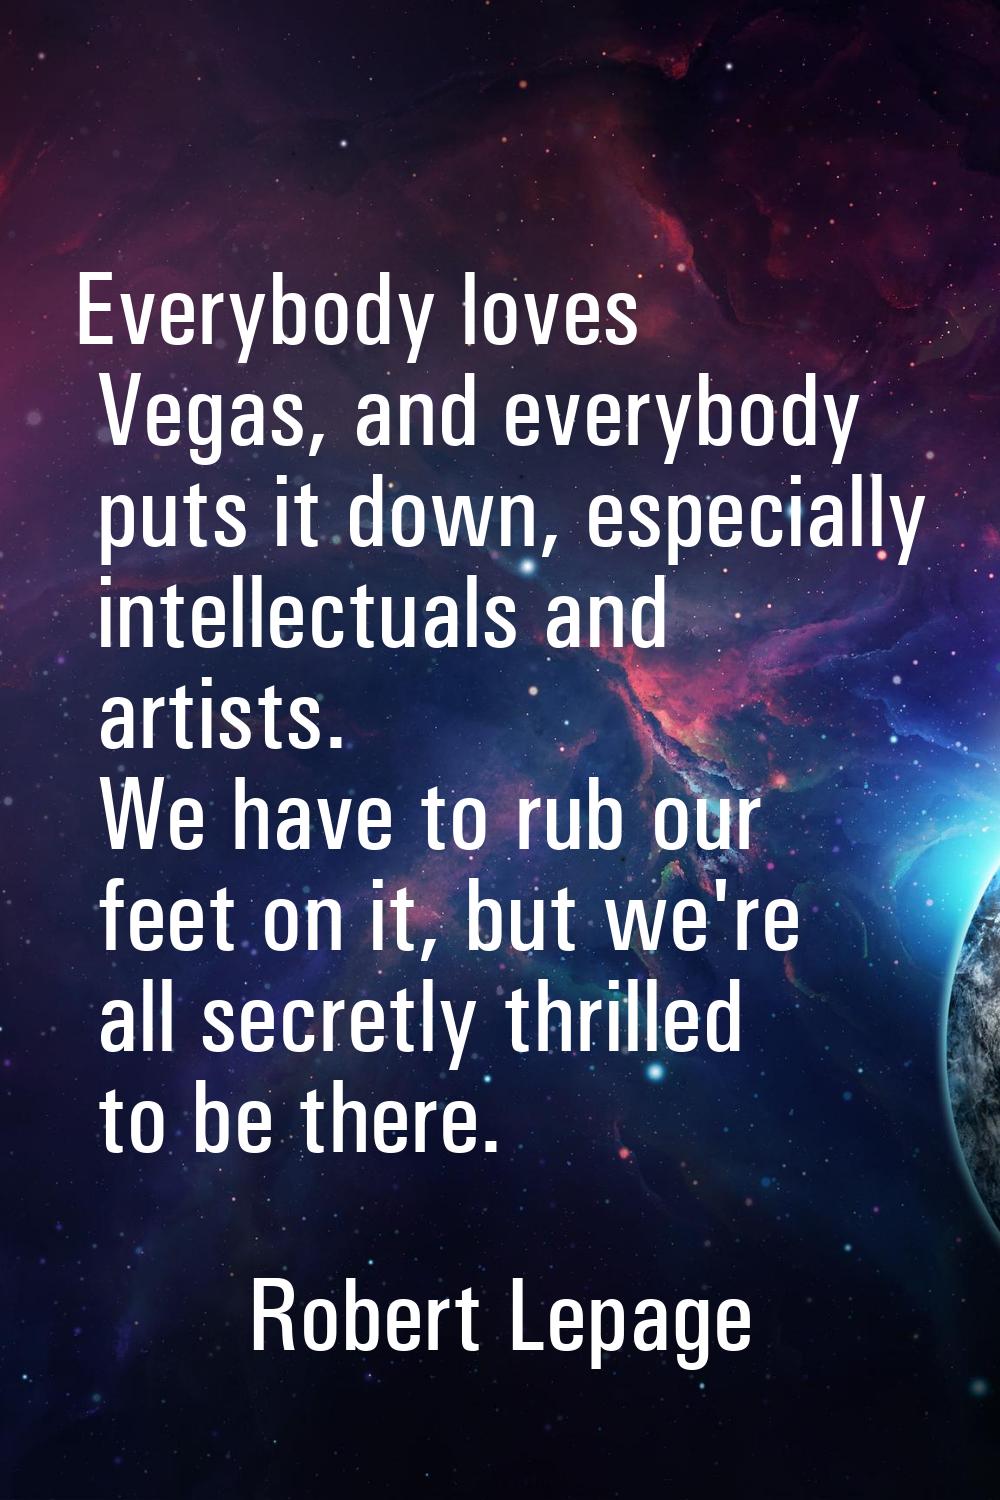 Everybody loves Vegas, and everybody puts it down, especially intellectuals and artists. We have to